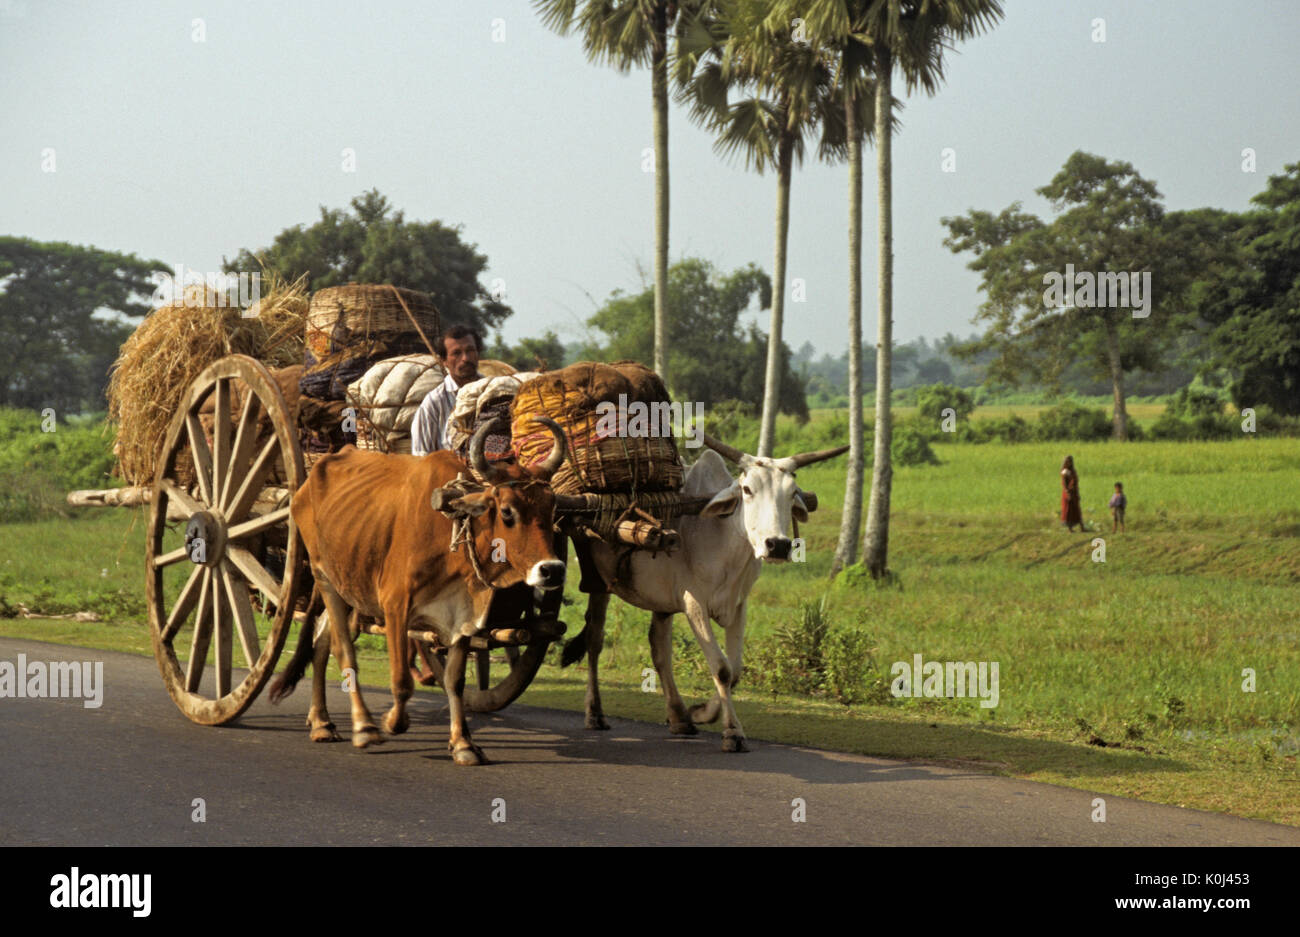 Bullock cart carrying harvested rice, rural southern India Stock Photo